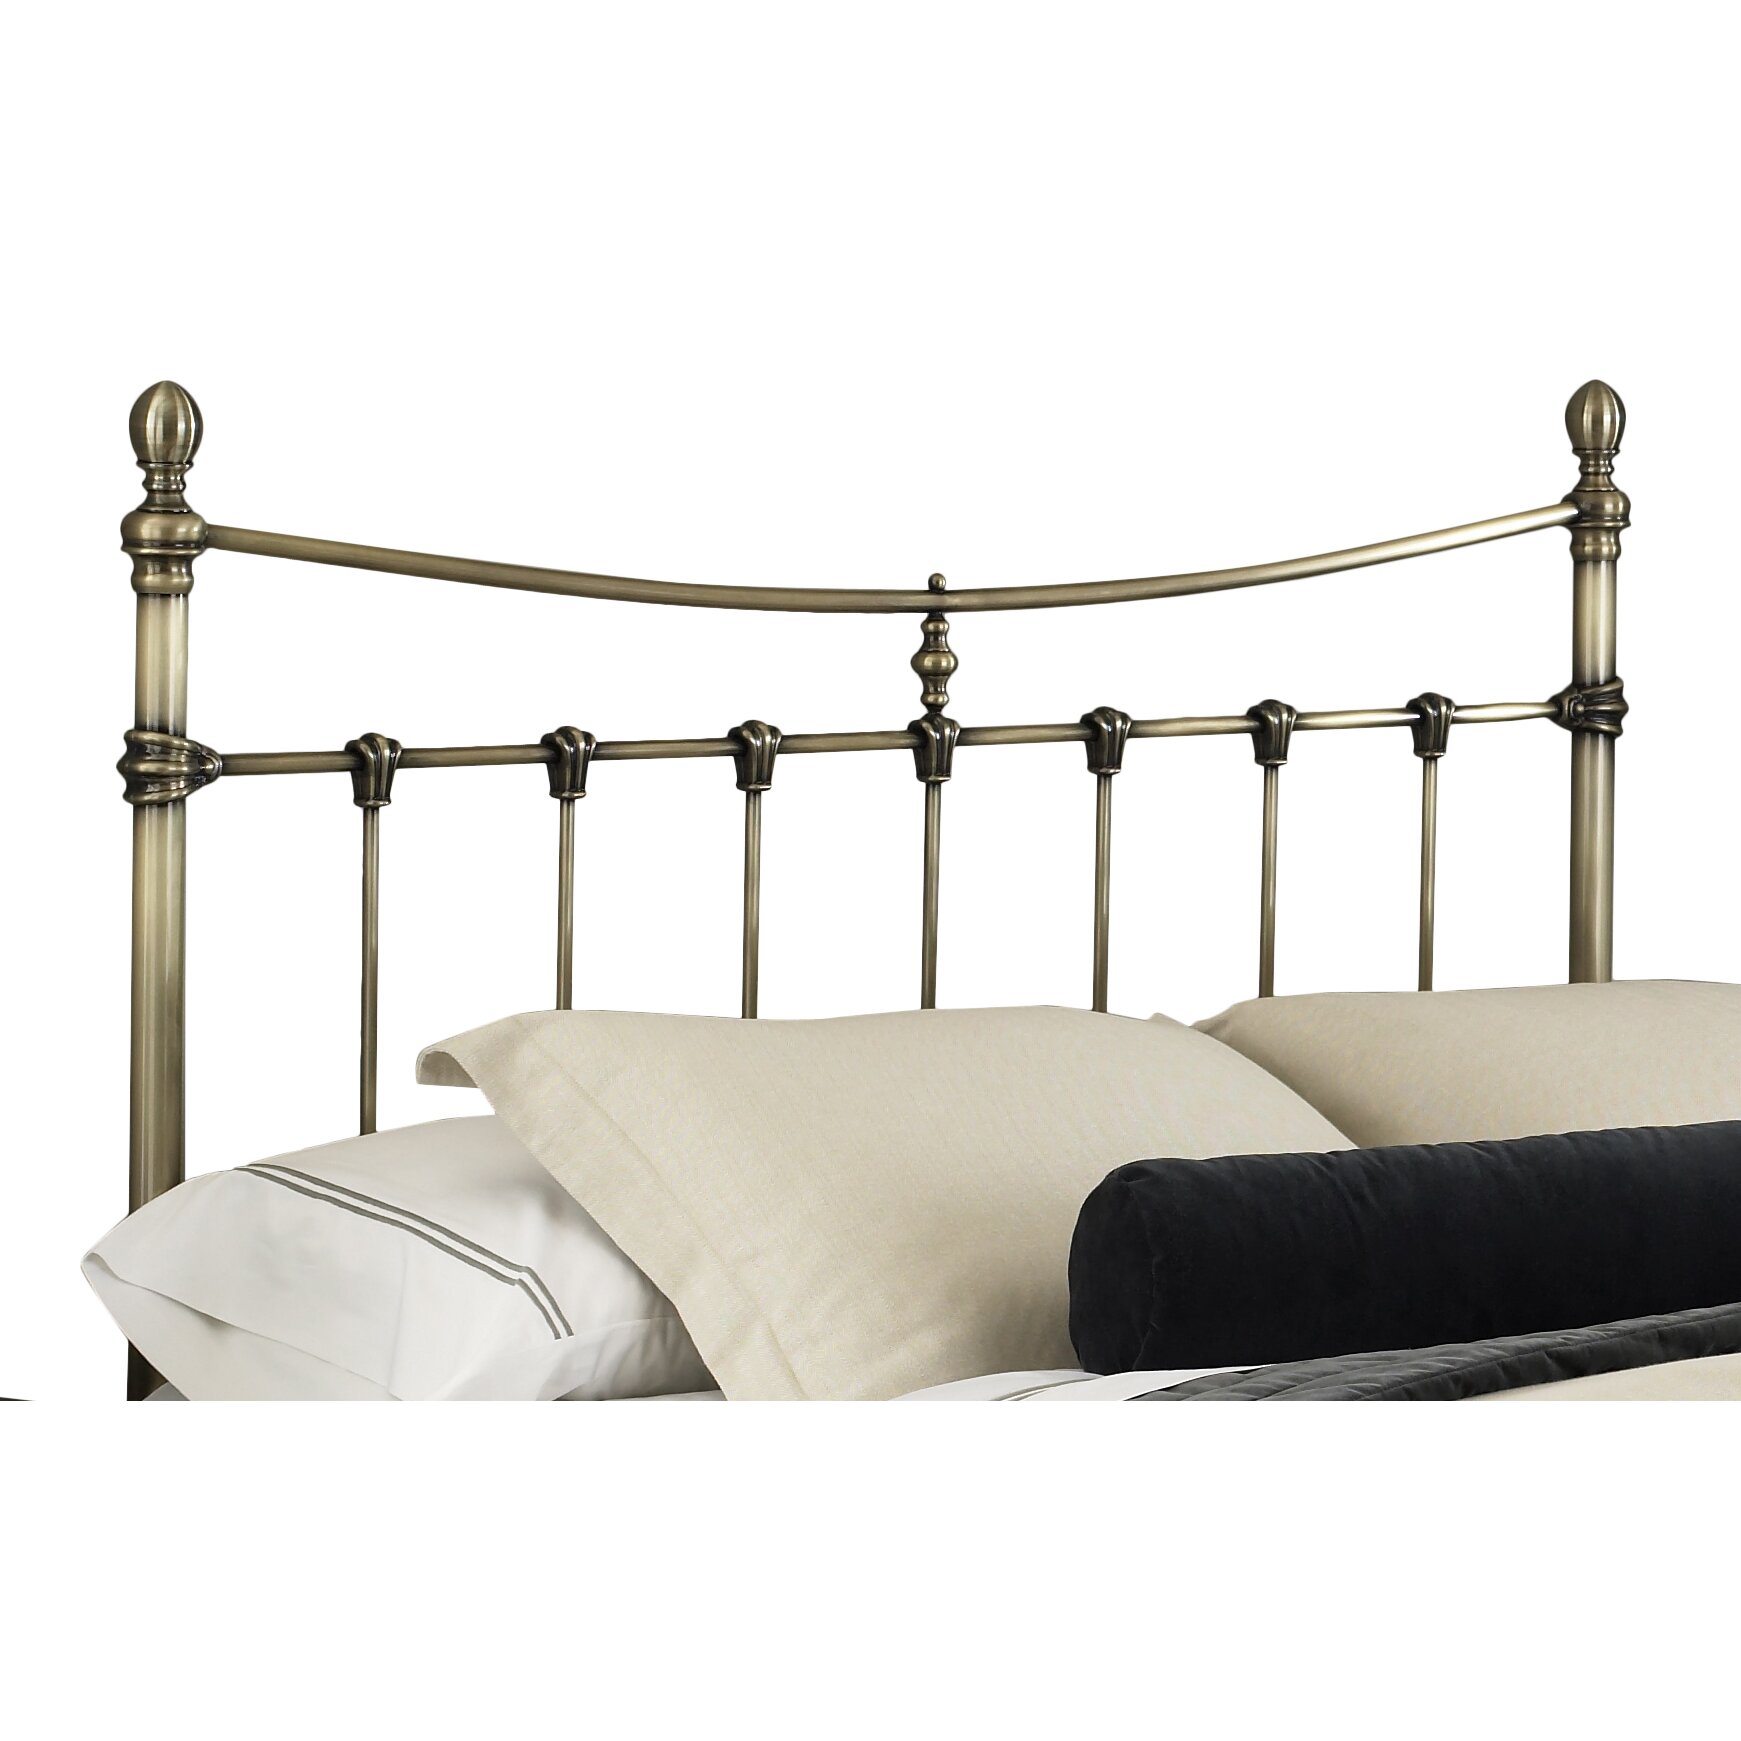 Fashion Bed Group Headboards 117